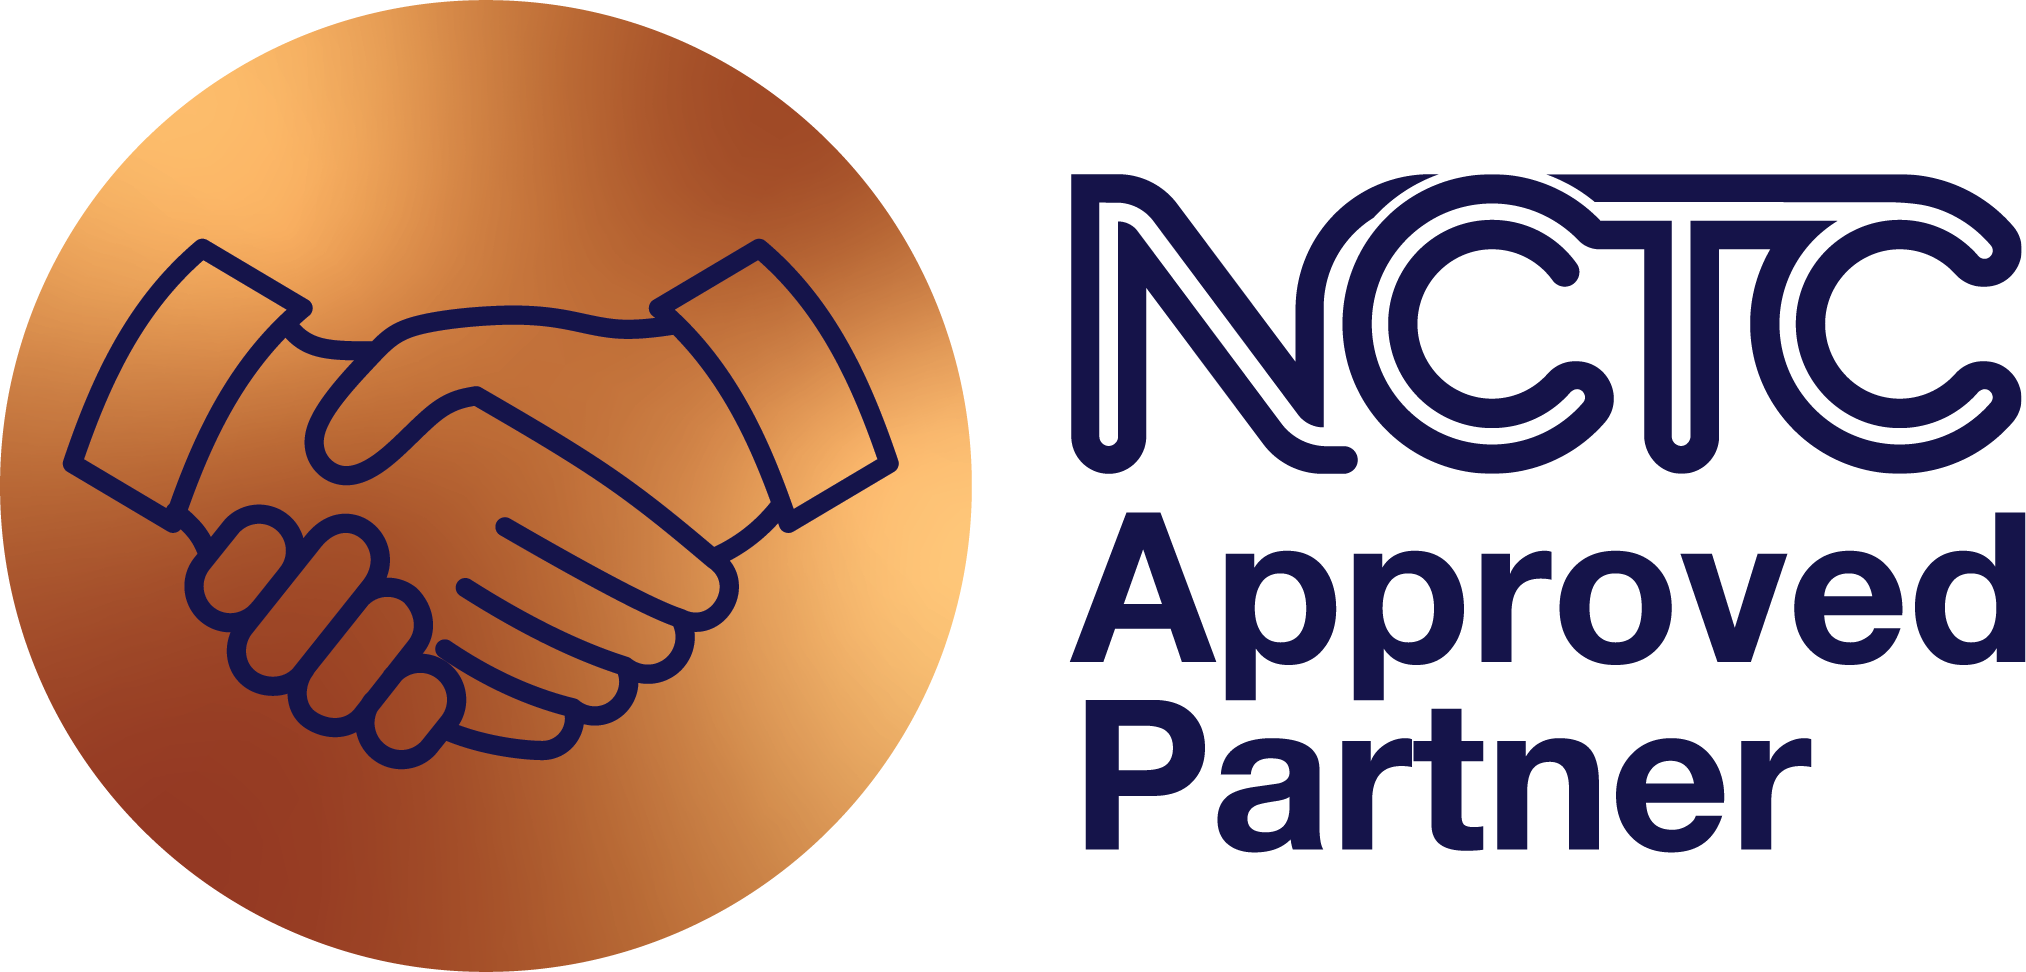 NCTC Approved Partner